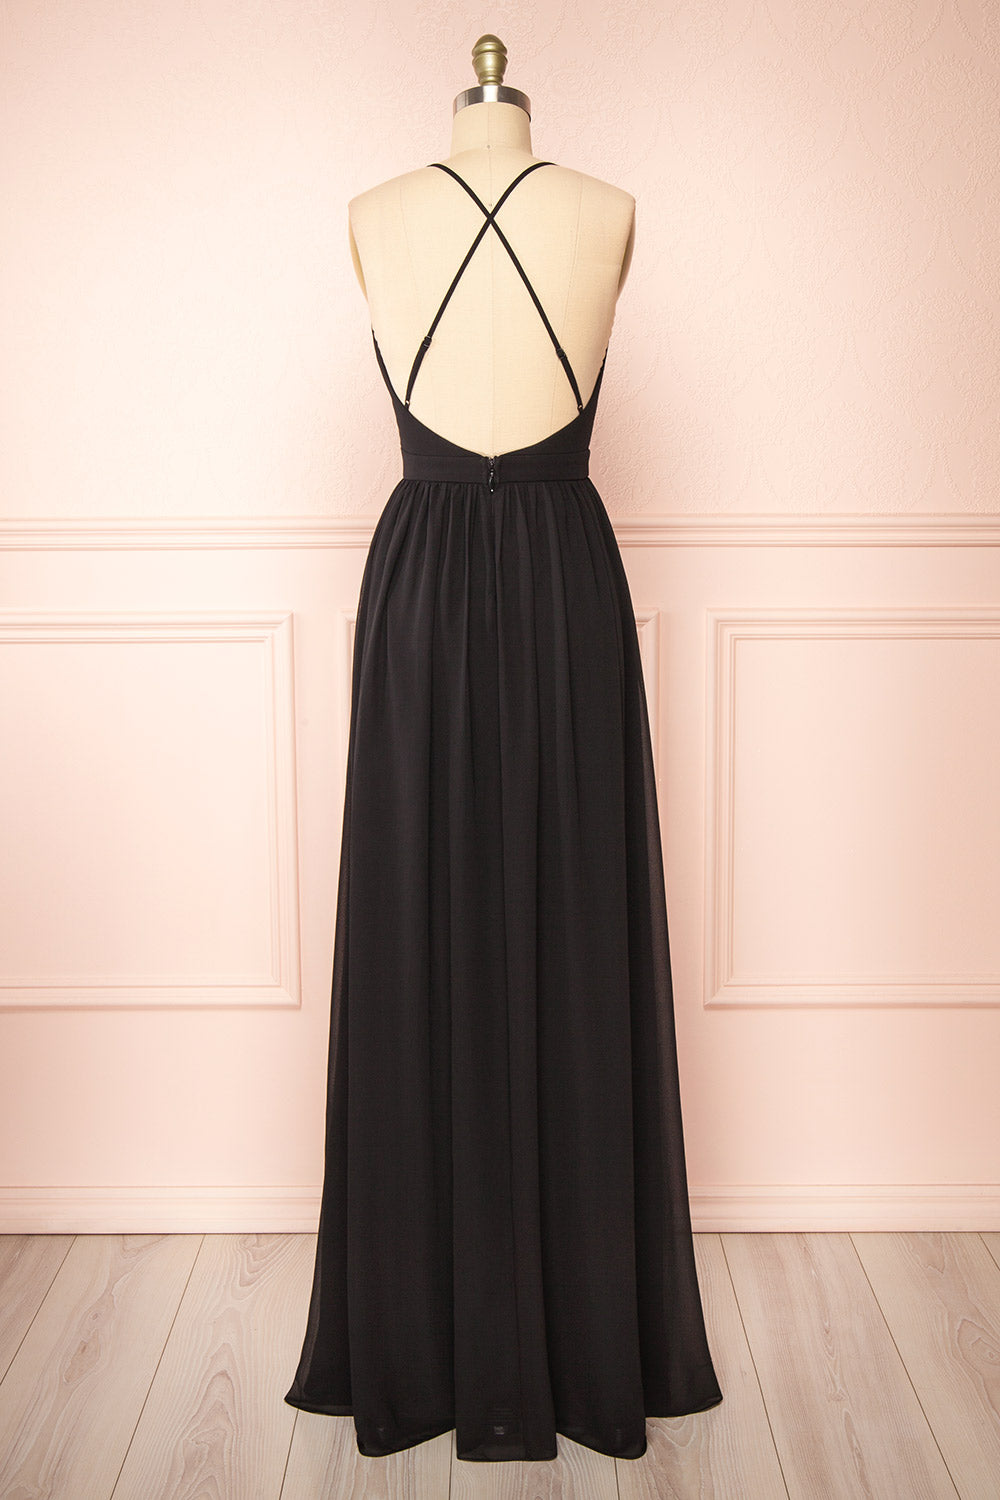  Haley Black Chiffon Gown with Plunging Neckline | Boutique 1861 back view